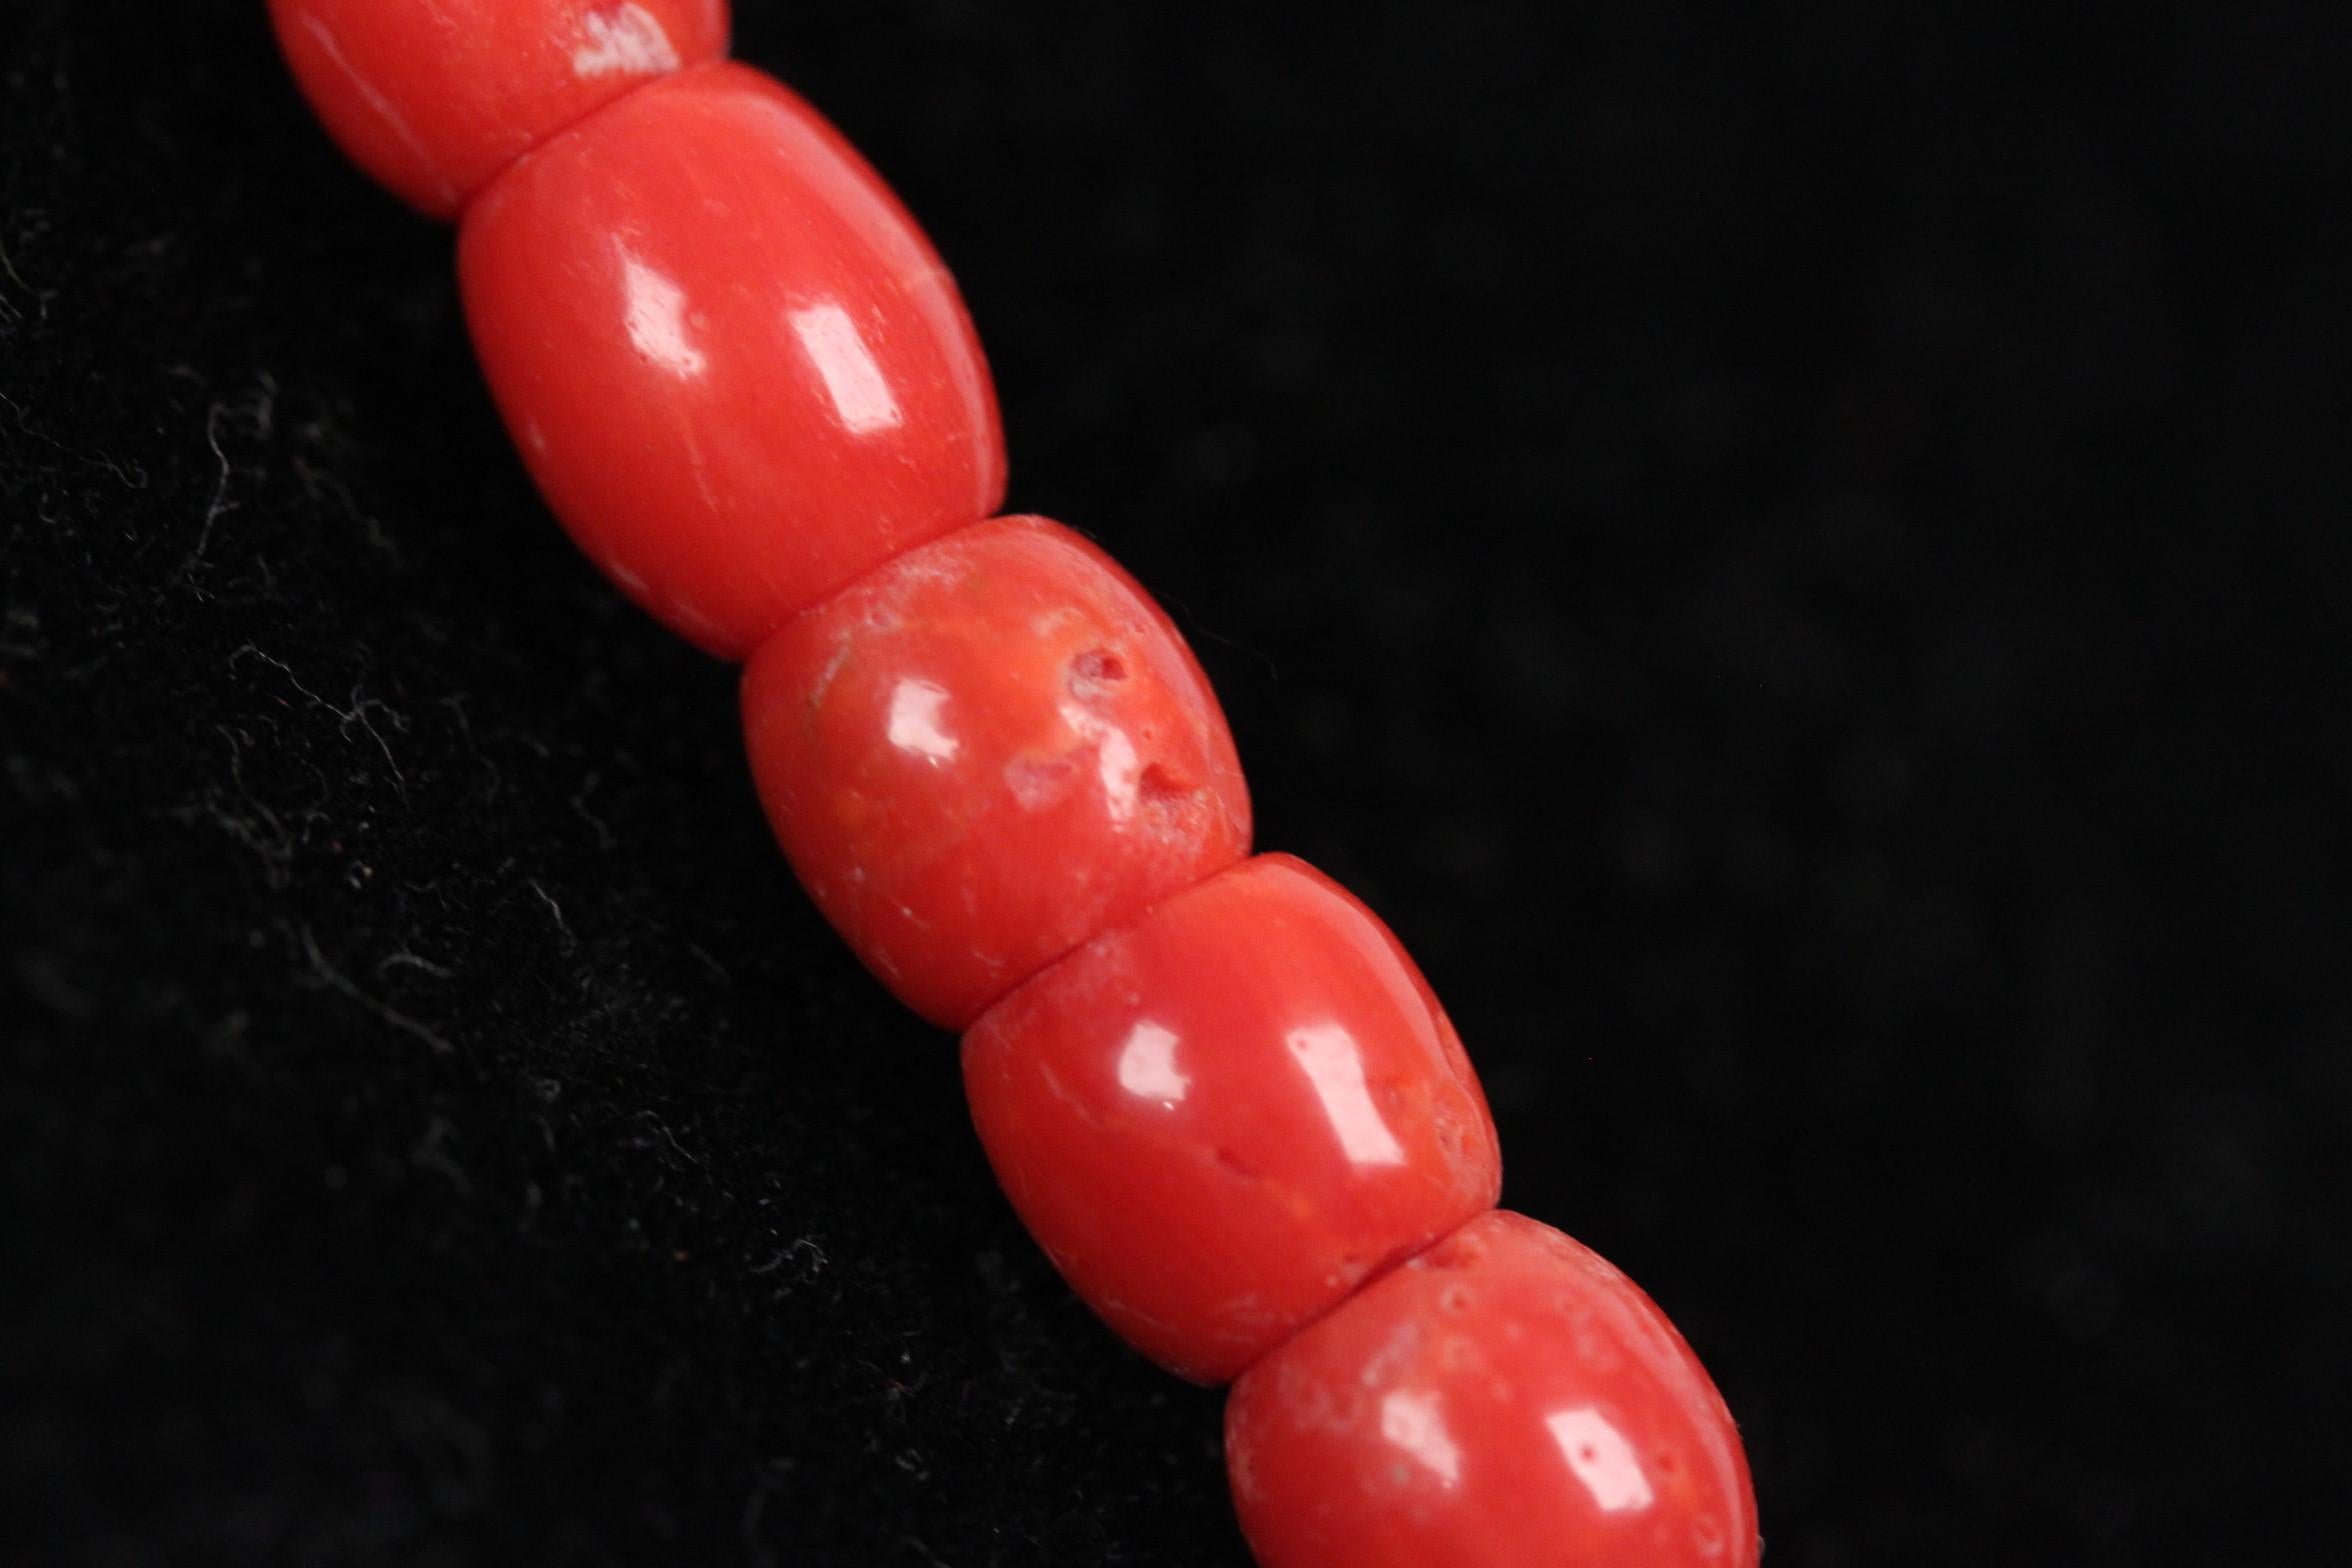 Vintage beaded necklace made of graduated barrel beads of red sardinian coral - Graduated beads sizes 6mm x 4mm to 11mm x 14mm - Total length: 23 1/2 inches - 59,7 cm - Weight: 59 gr.

MATERIAL: Coral

COLOR: Red

COUNTRY OF MANUFACTURE: